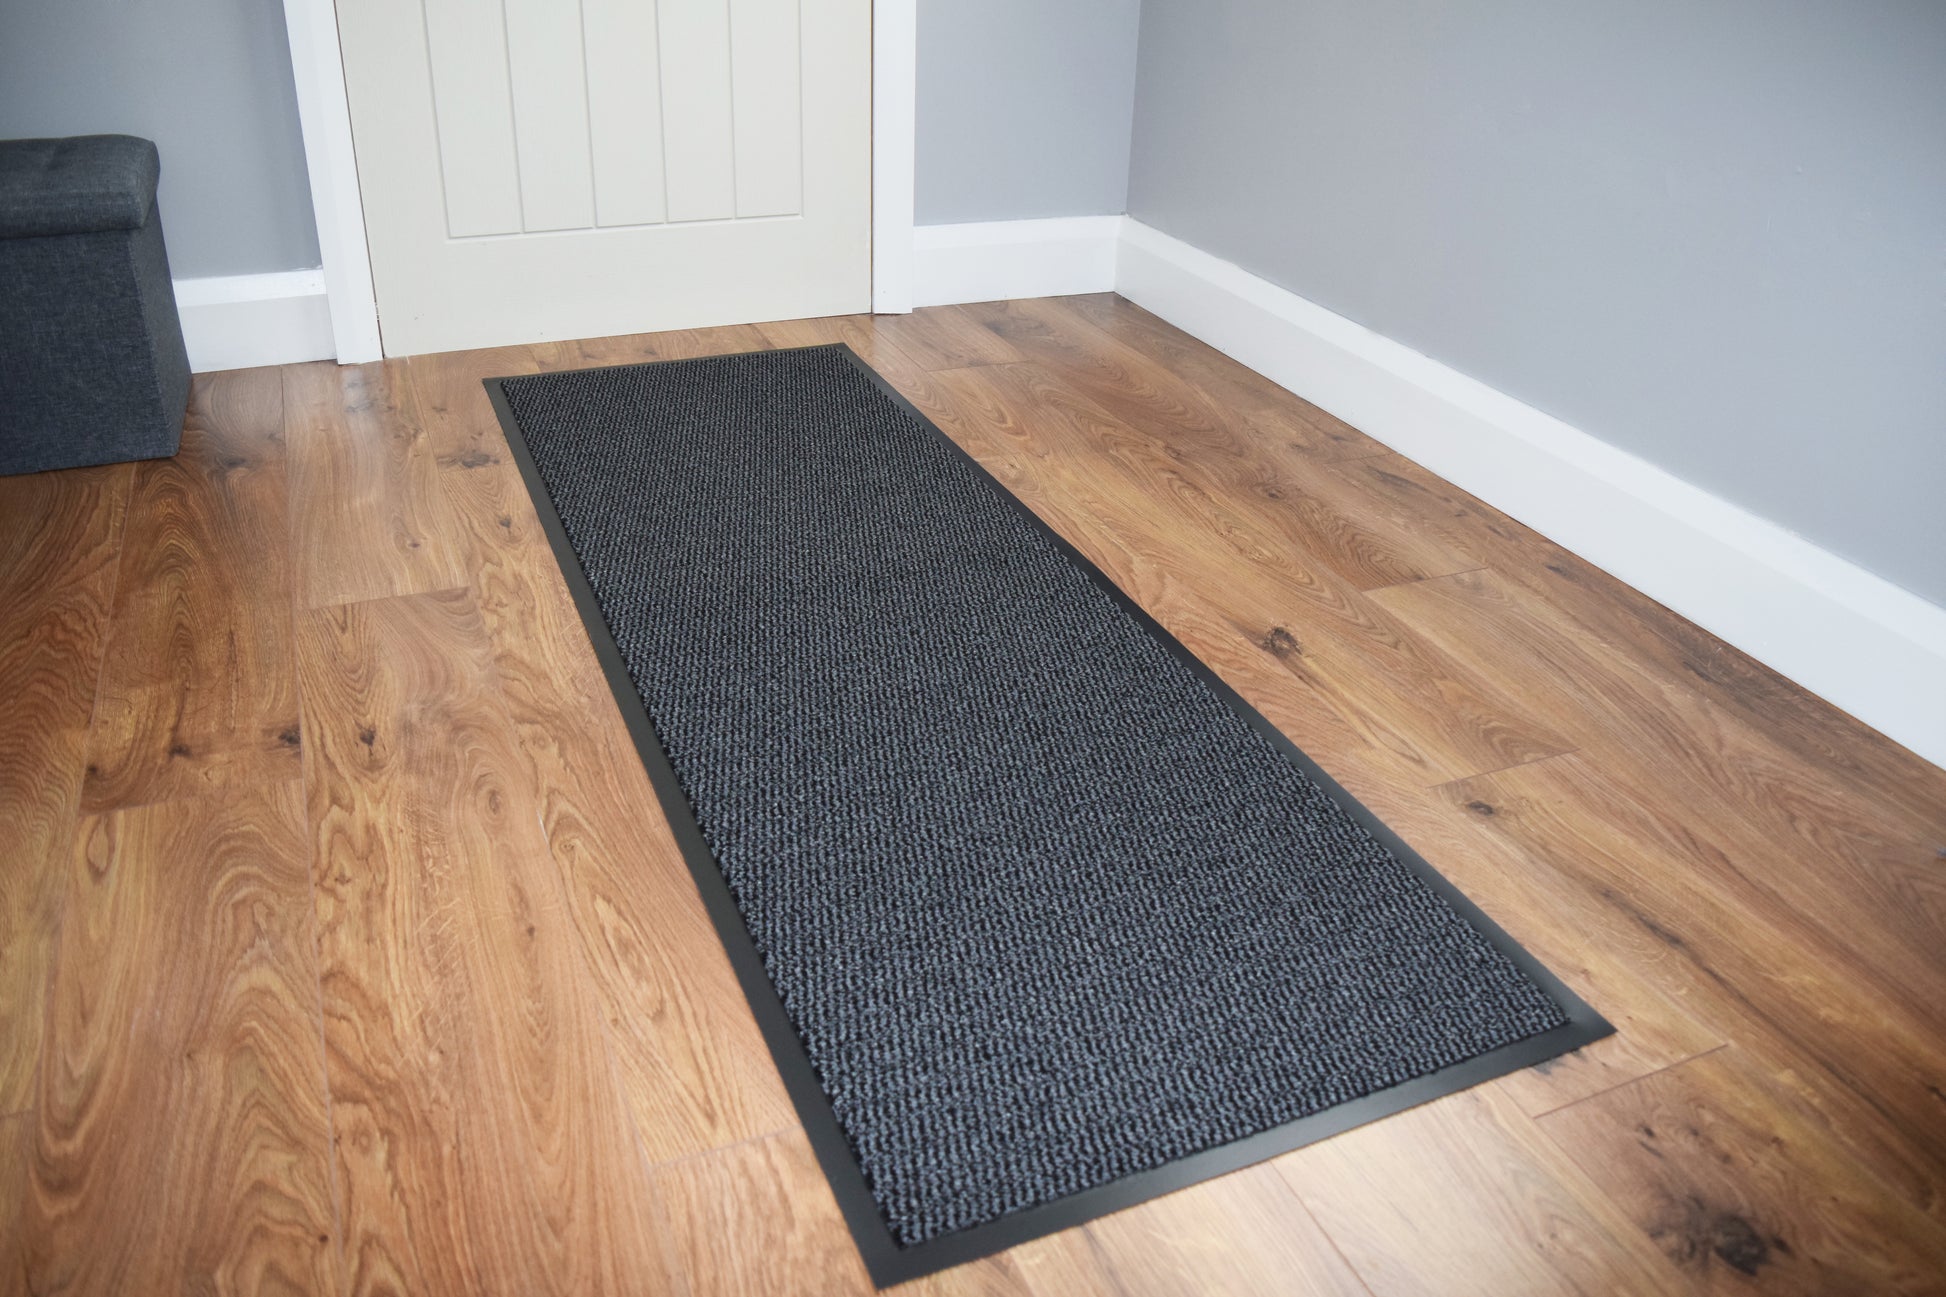 TrendMakers DOOR MATS BIG EXTRA LARGE GREY AND BLACK BARRIER MAT RUBBER  EDGED HEAVY DUTY NON SLIP KITCHEN ENTRANCE HALL RUNNER RUG MATS 120X180CM  (6X4FT), POLY…